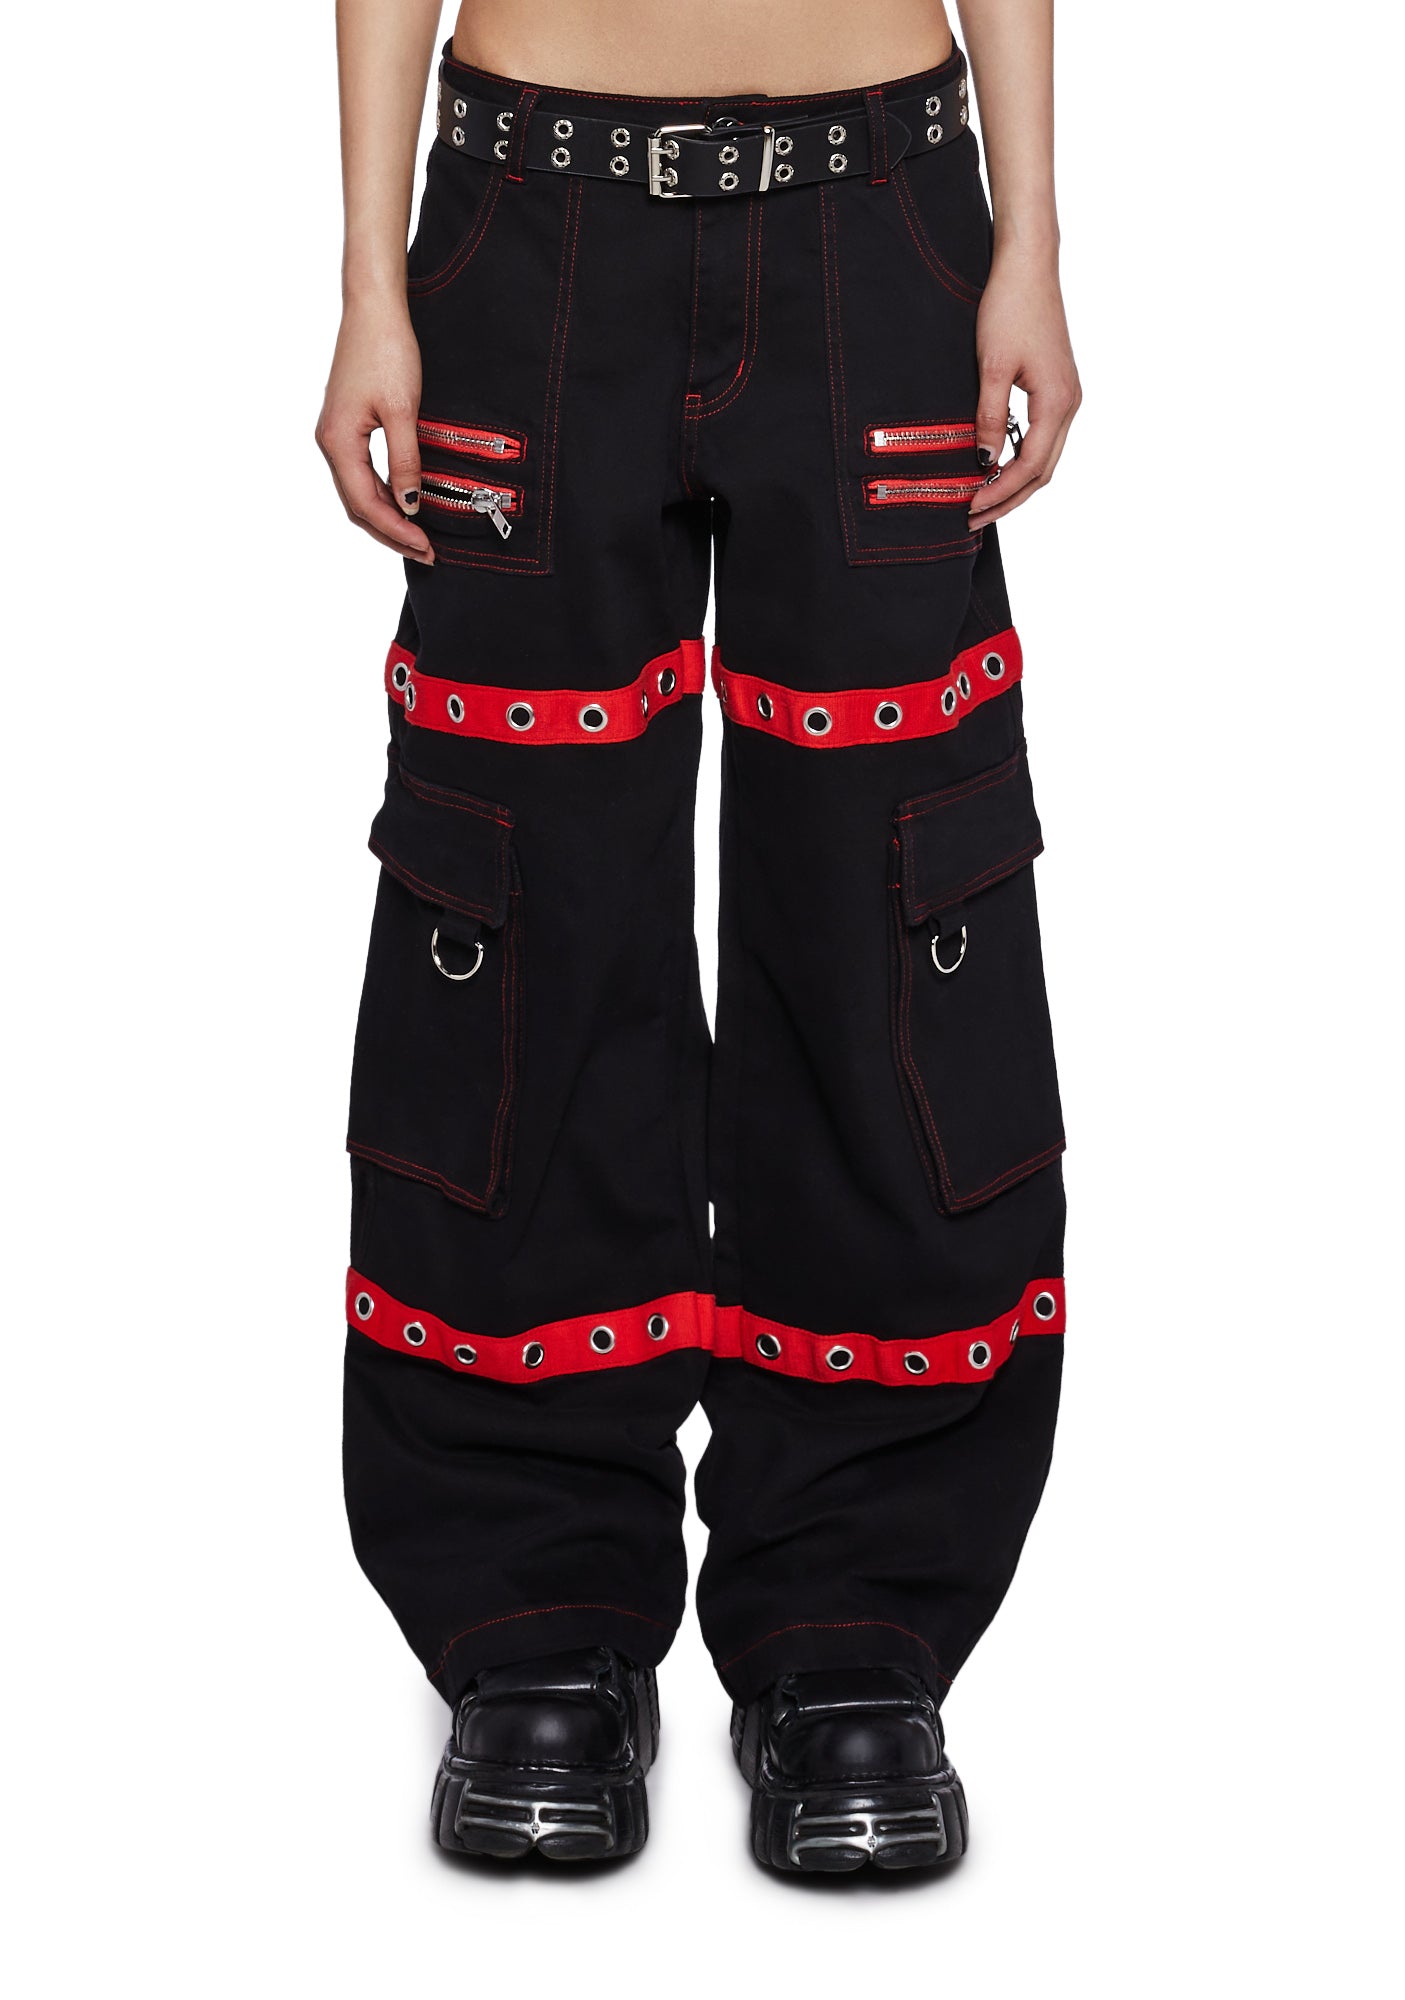 Buy Red Trippy Pant Cotton Lycra for Best Price, Reviews, Free Shipping